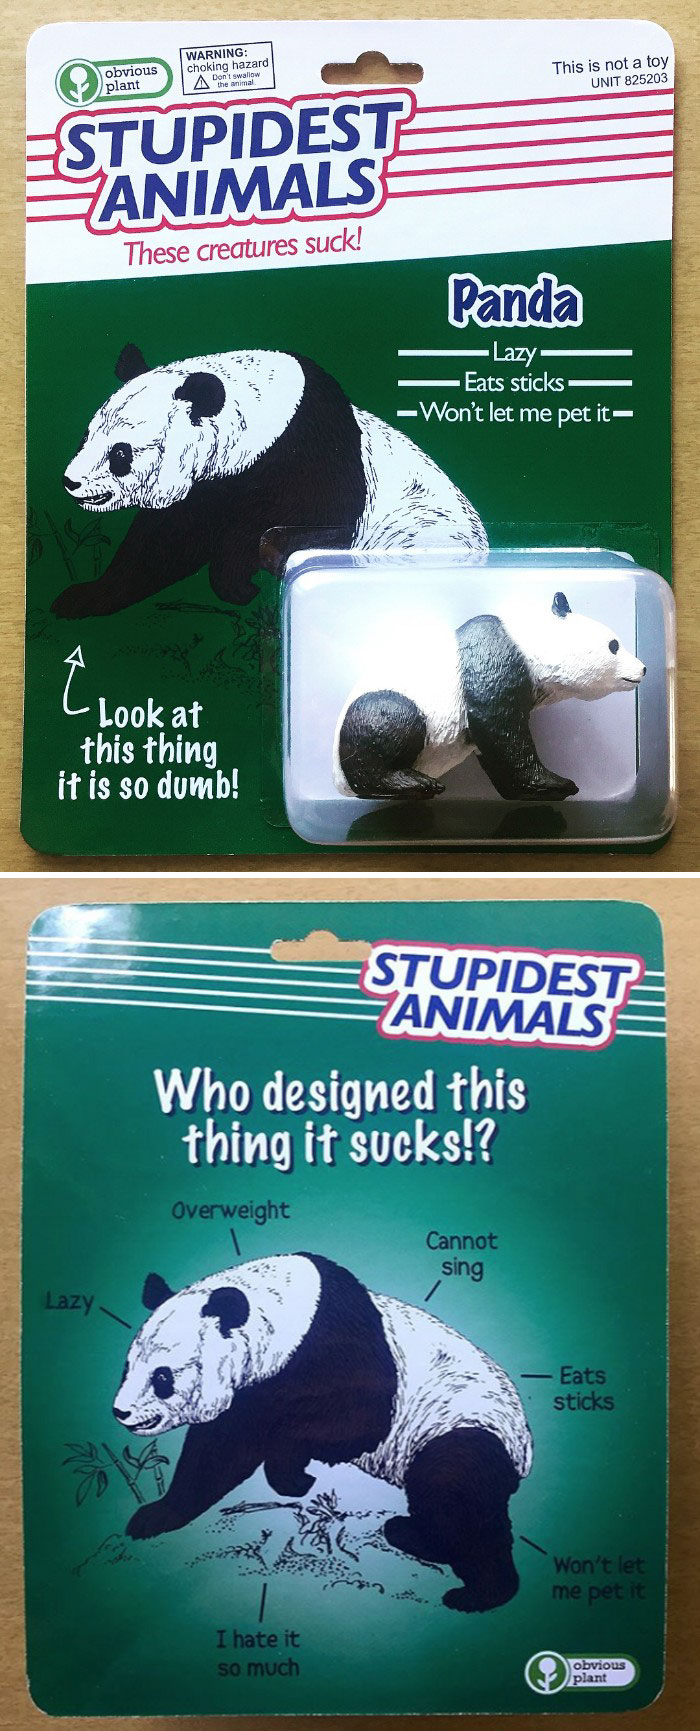 obvious plant toys - obvious plant Warning choking hazard A Don't swallow This is not a toy Unit 825203 A the animal Estupidest Animals These creatures suck! Panda Lazy Eats sticks Won't let me pet it Look at this thing it is so dumb! Stupidest Fanimals W